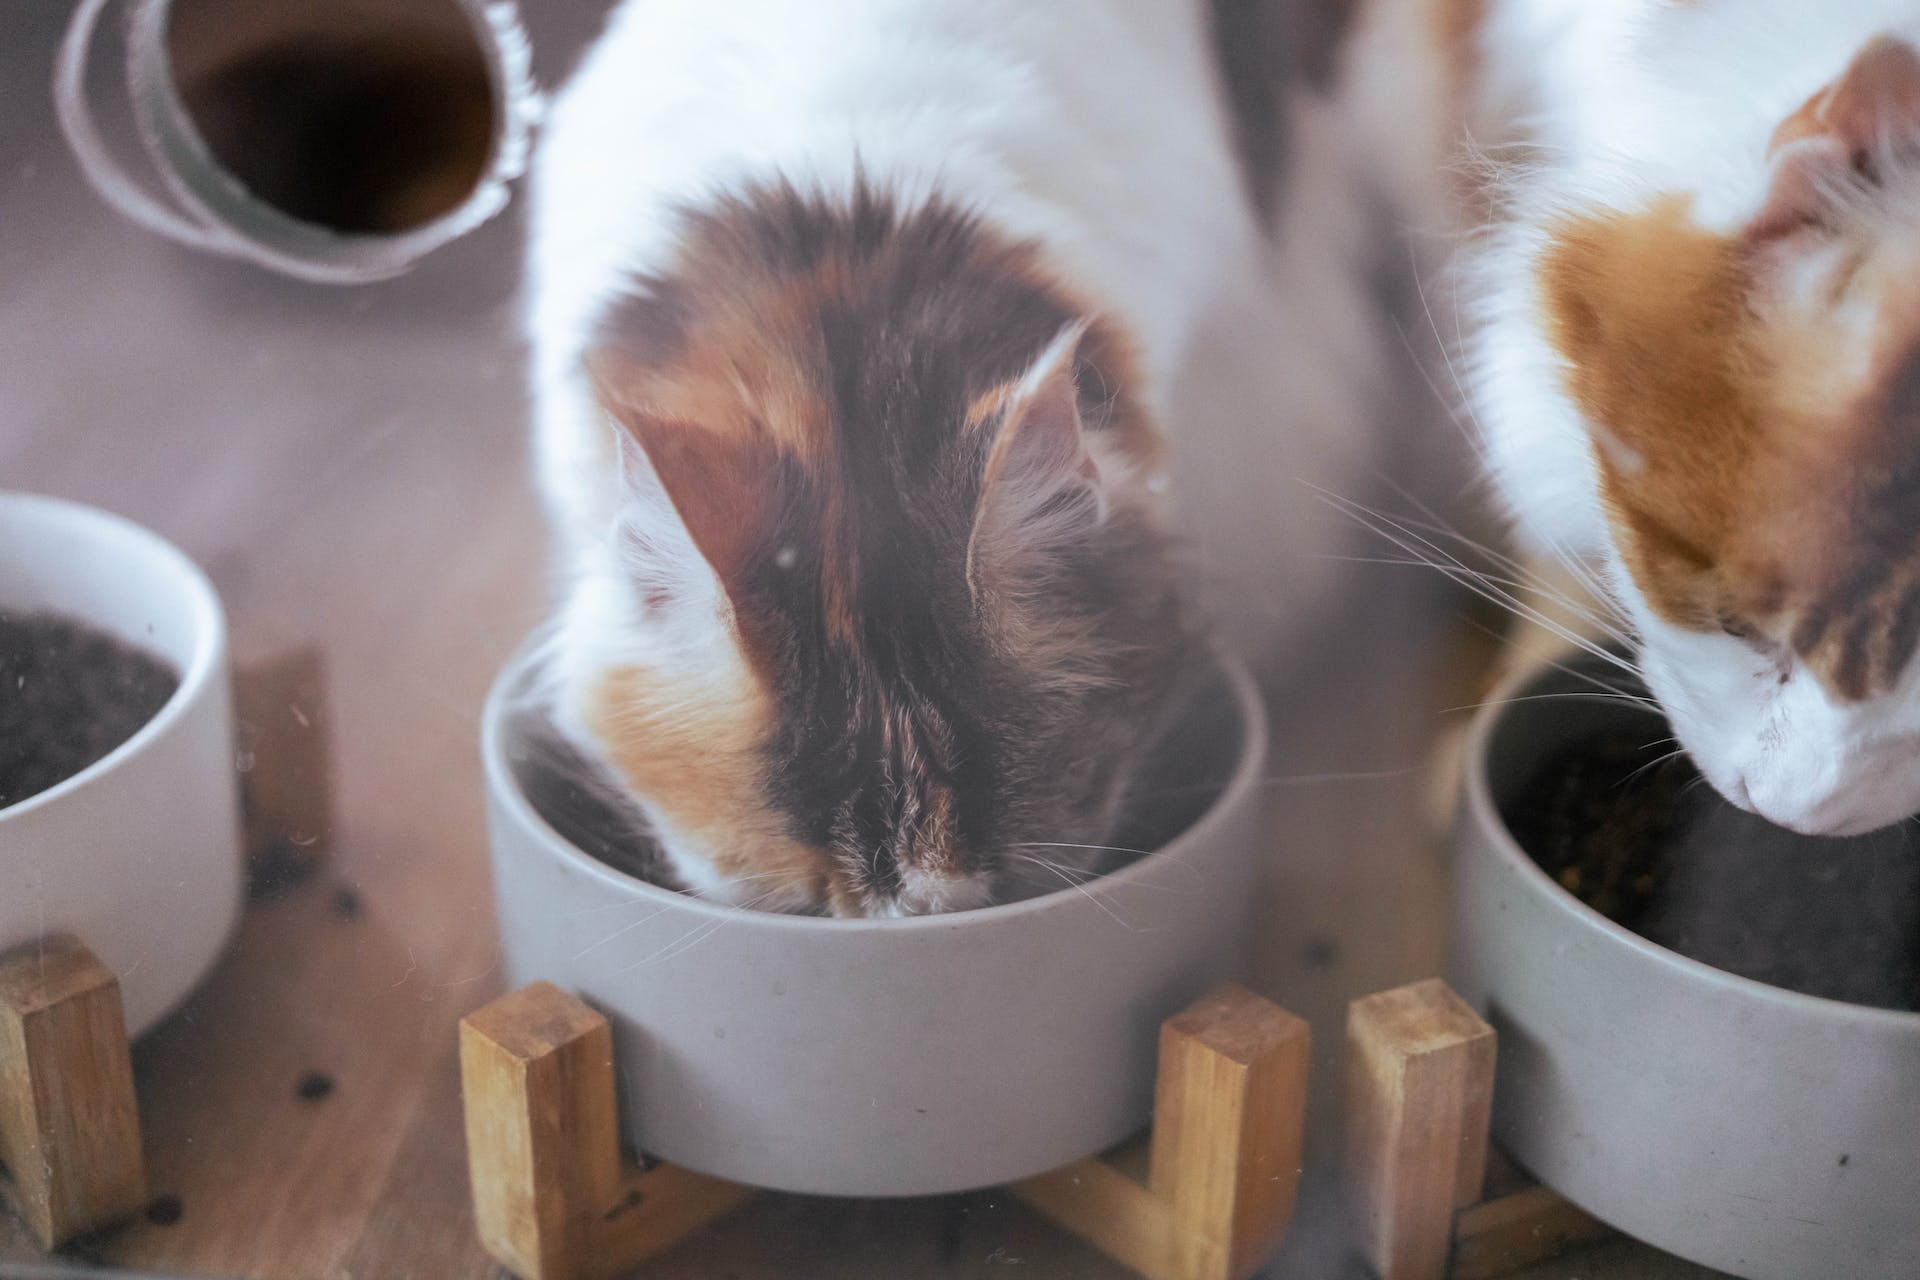 Two cats eating dry kibble from food bowls indoors